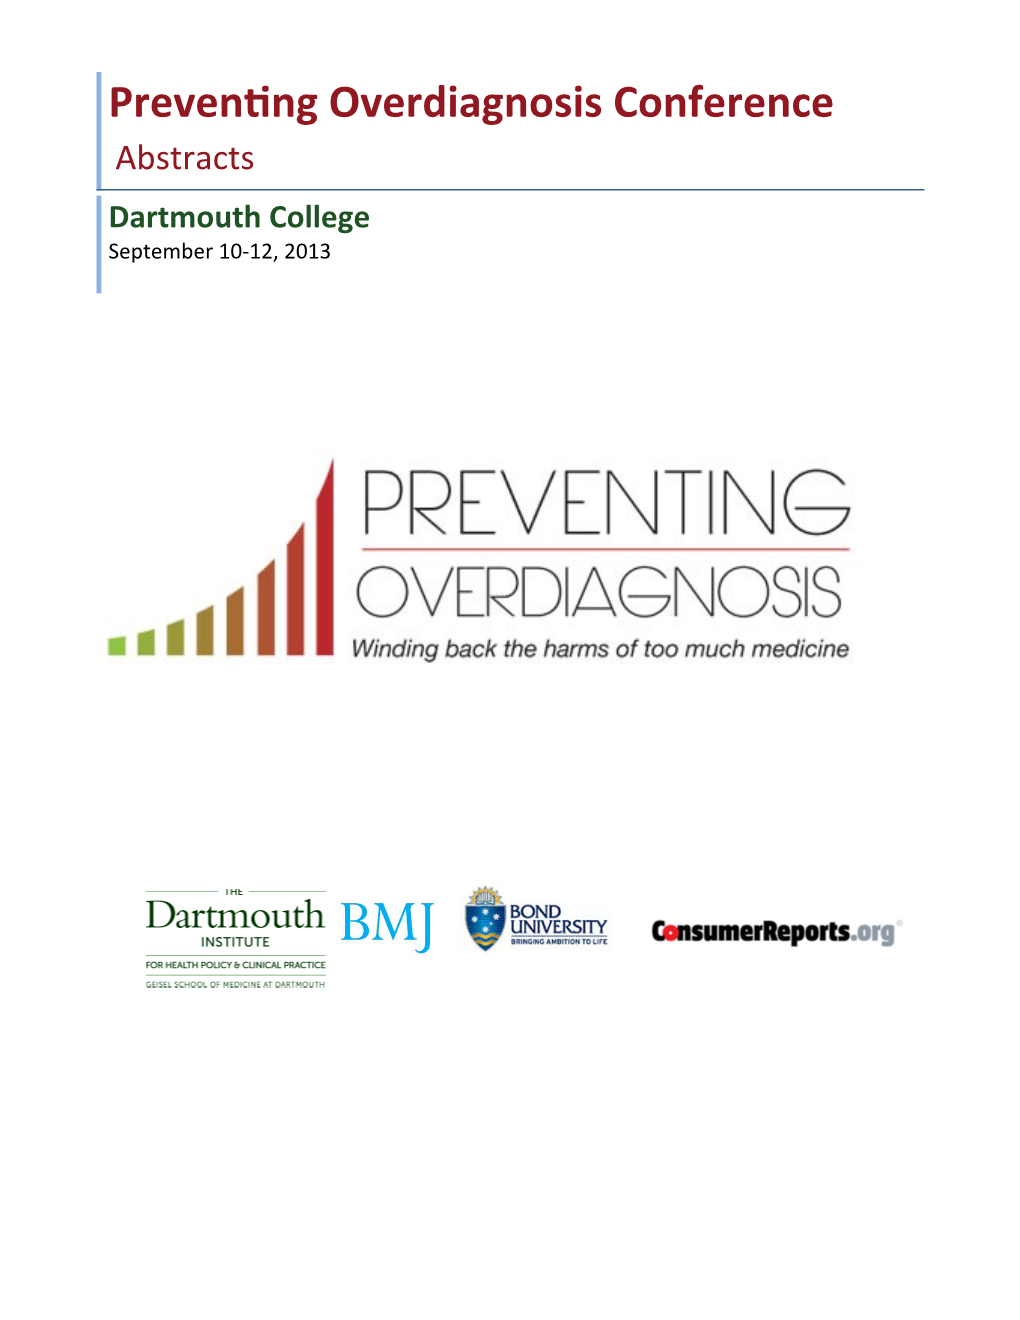 Preventing Overdiagnosis Conference Abstracts Dartmouth College September 10-12, 2013 Abstracts Are Hyperlinked